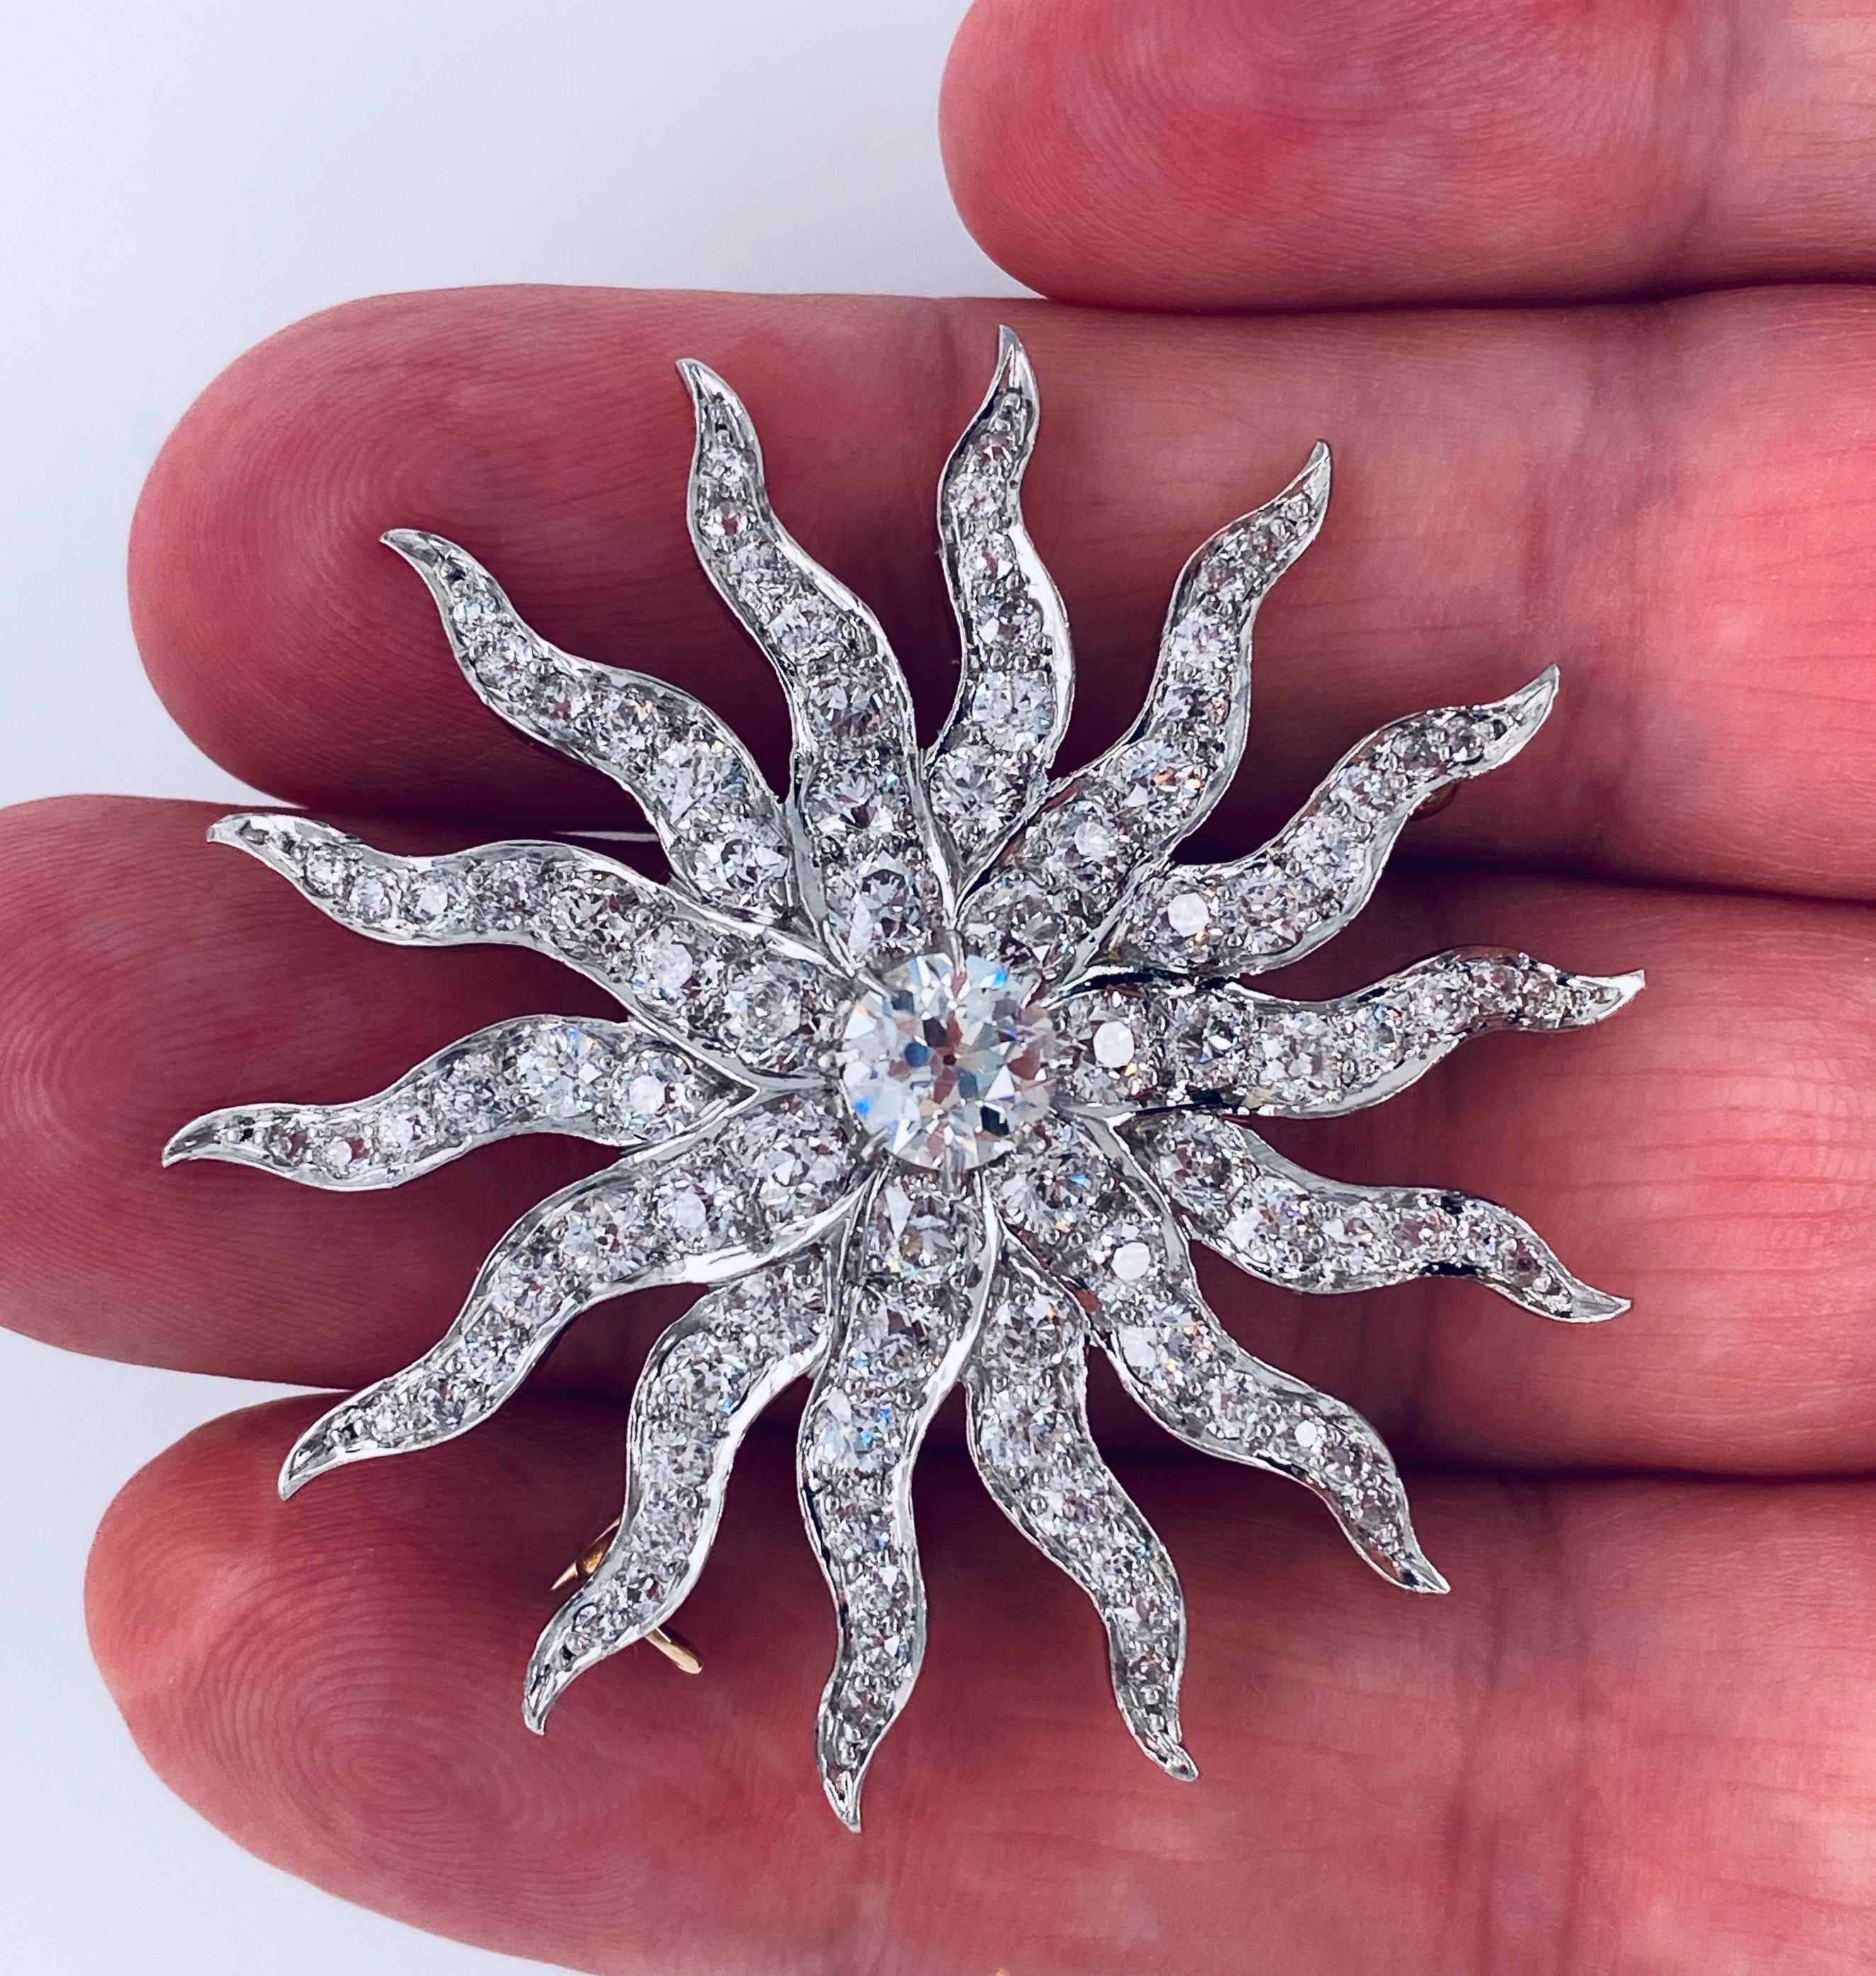 Offered here is an Antique Masterpiece, circa early 1900
A large sunburst handmade of platinum over 14kt yellow gold, about 2 inches in diameter.
Centered is a natural earth mined, old European cut diamond with a calculated weight of 1.18 ct set